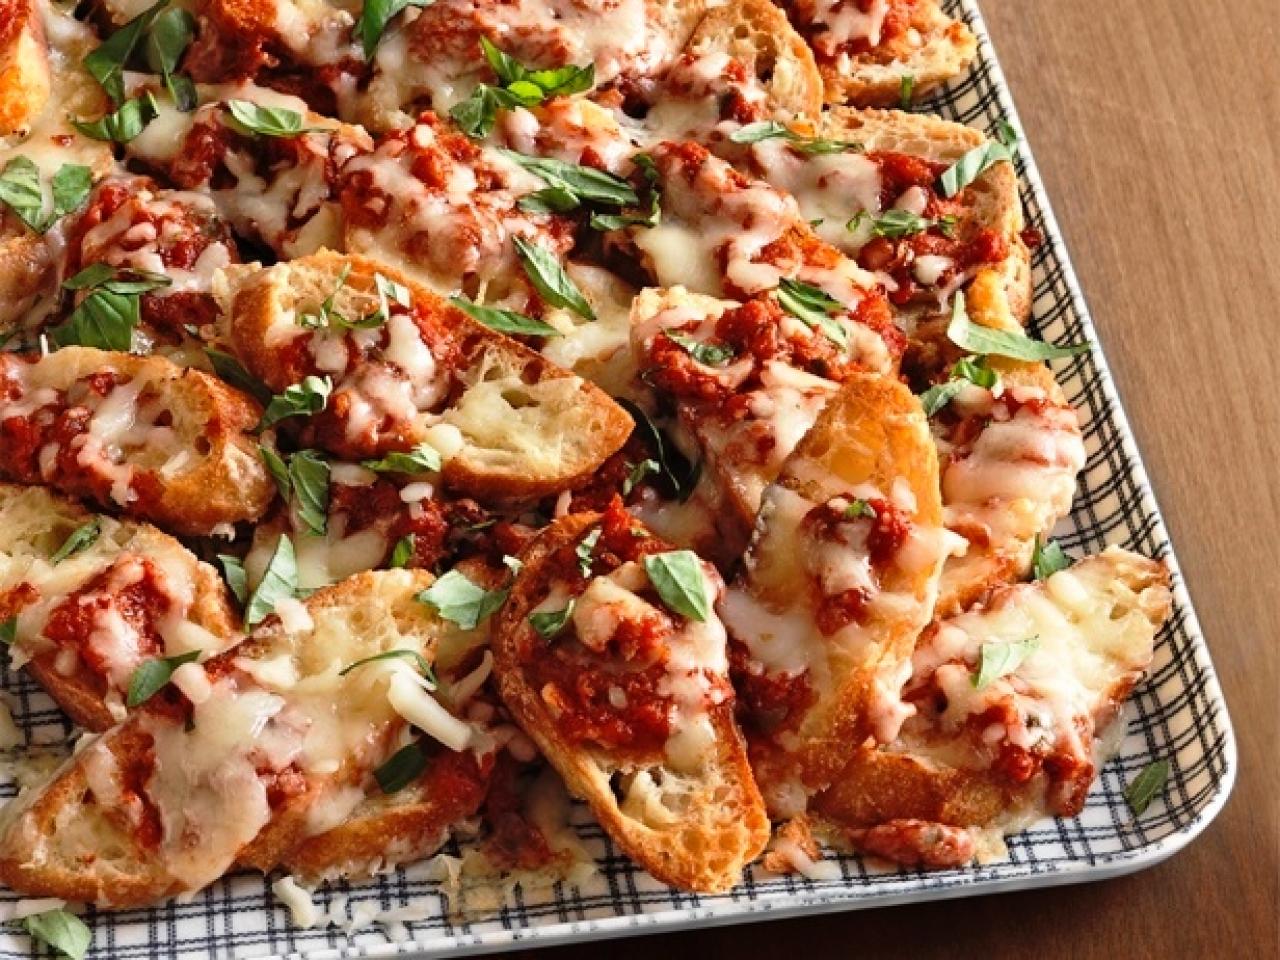 50 Nachos Recipes and Ideas : Food Network | Recipes, Dinners and Easy ...